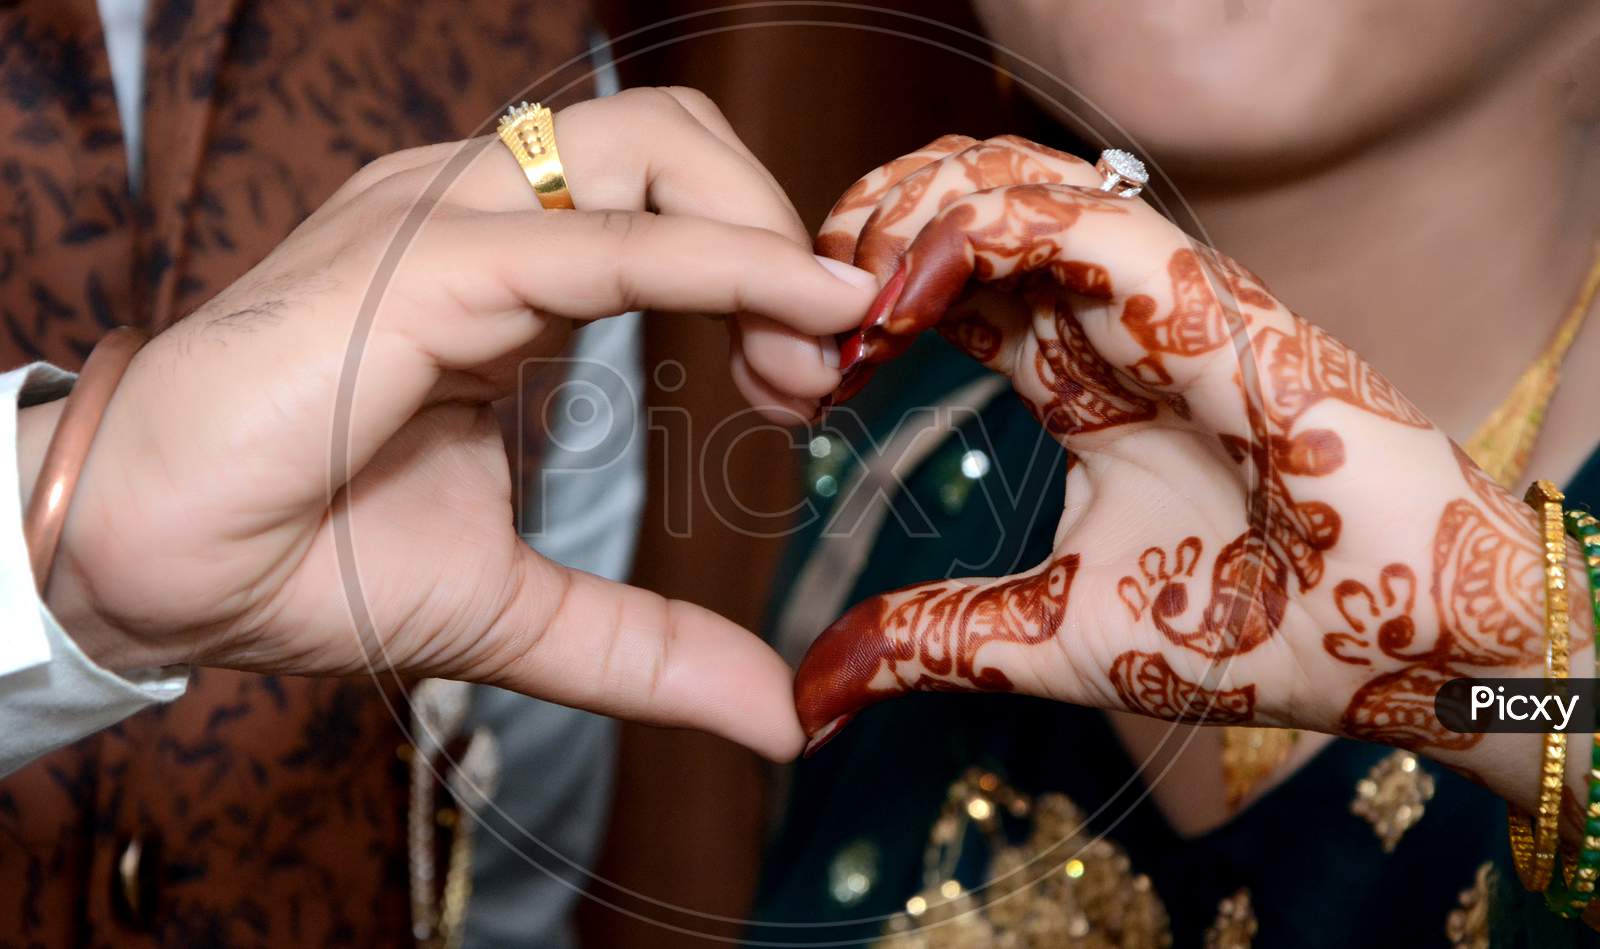 Young Newlywed Couple Making A Heart Gesture With Their Hands